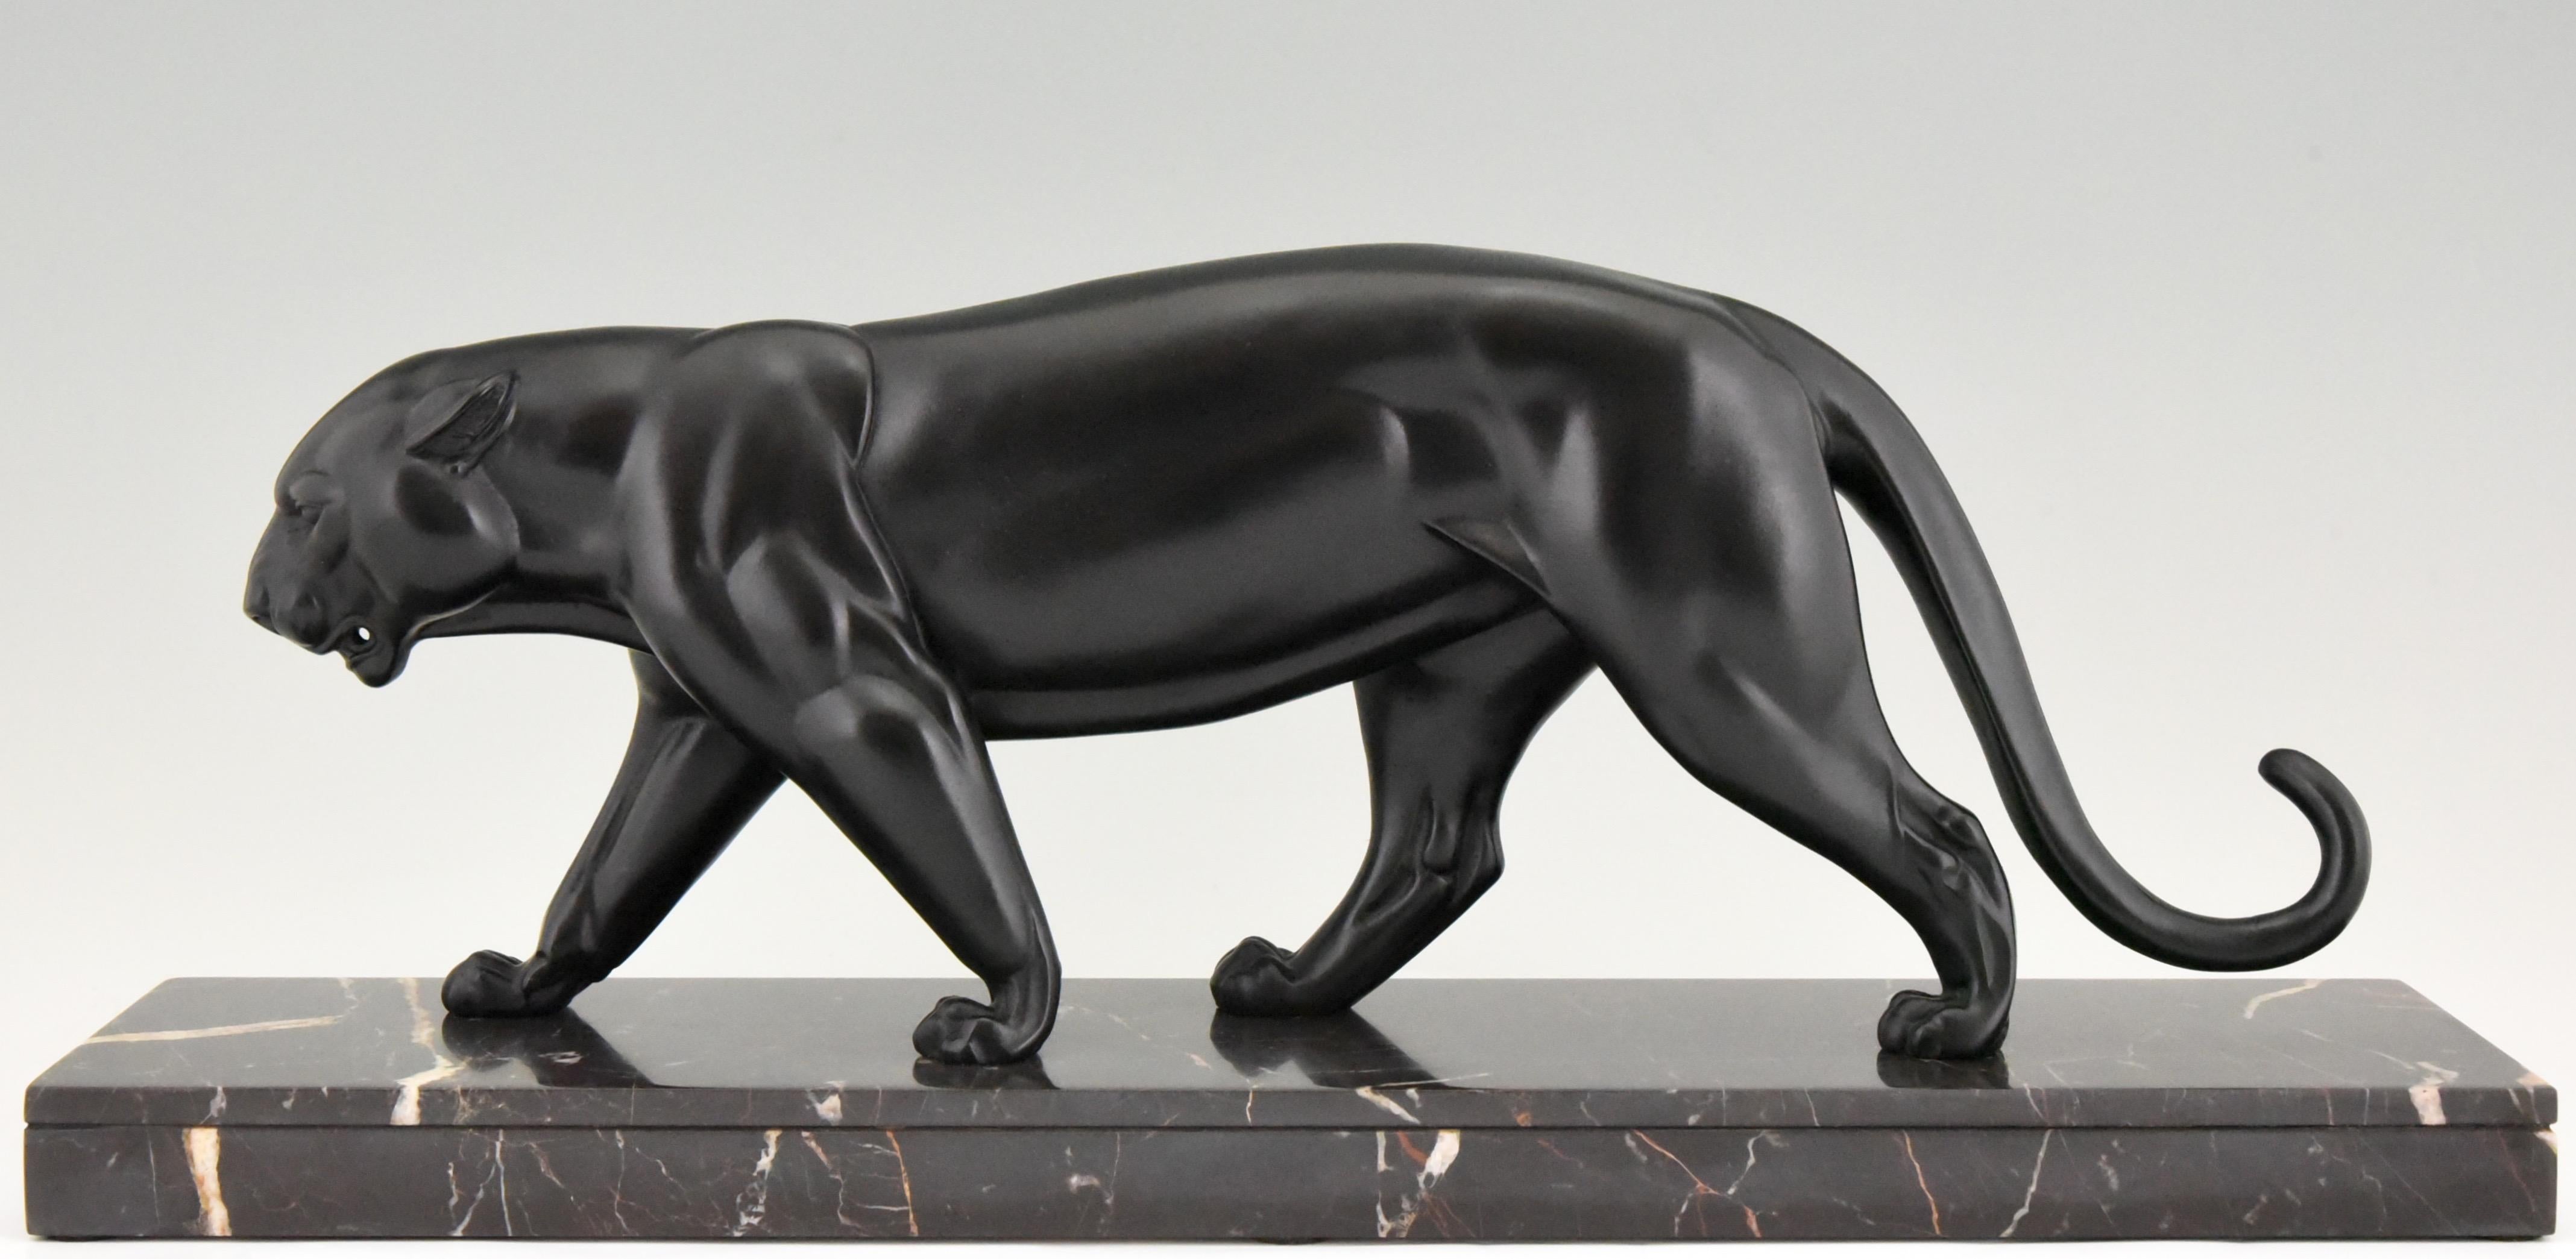 Art Deco sculpture of a walking panther signed by the well known French sculptor Irénée Rochard. The sculpture has a beautiful black patina and stands on a black marble base, circa 1930.
Literature:
Animals in bronze by Christopher Payne. Antique